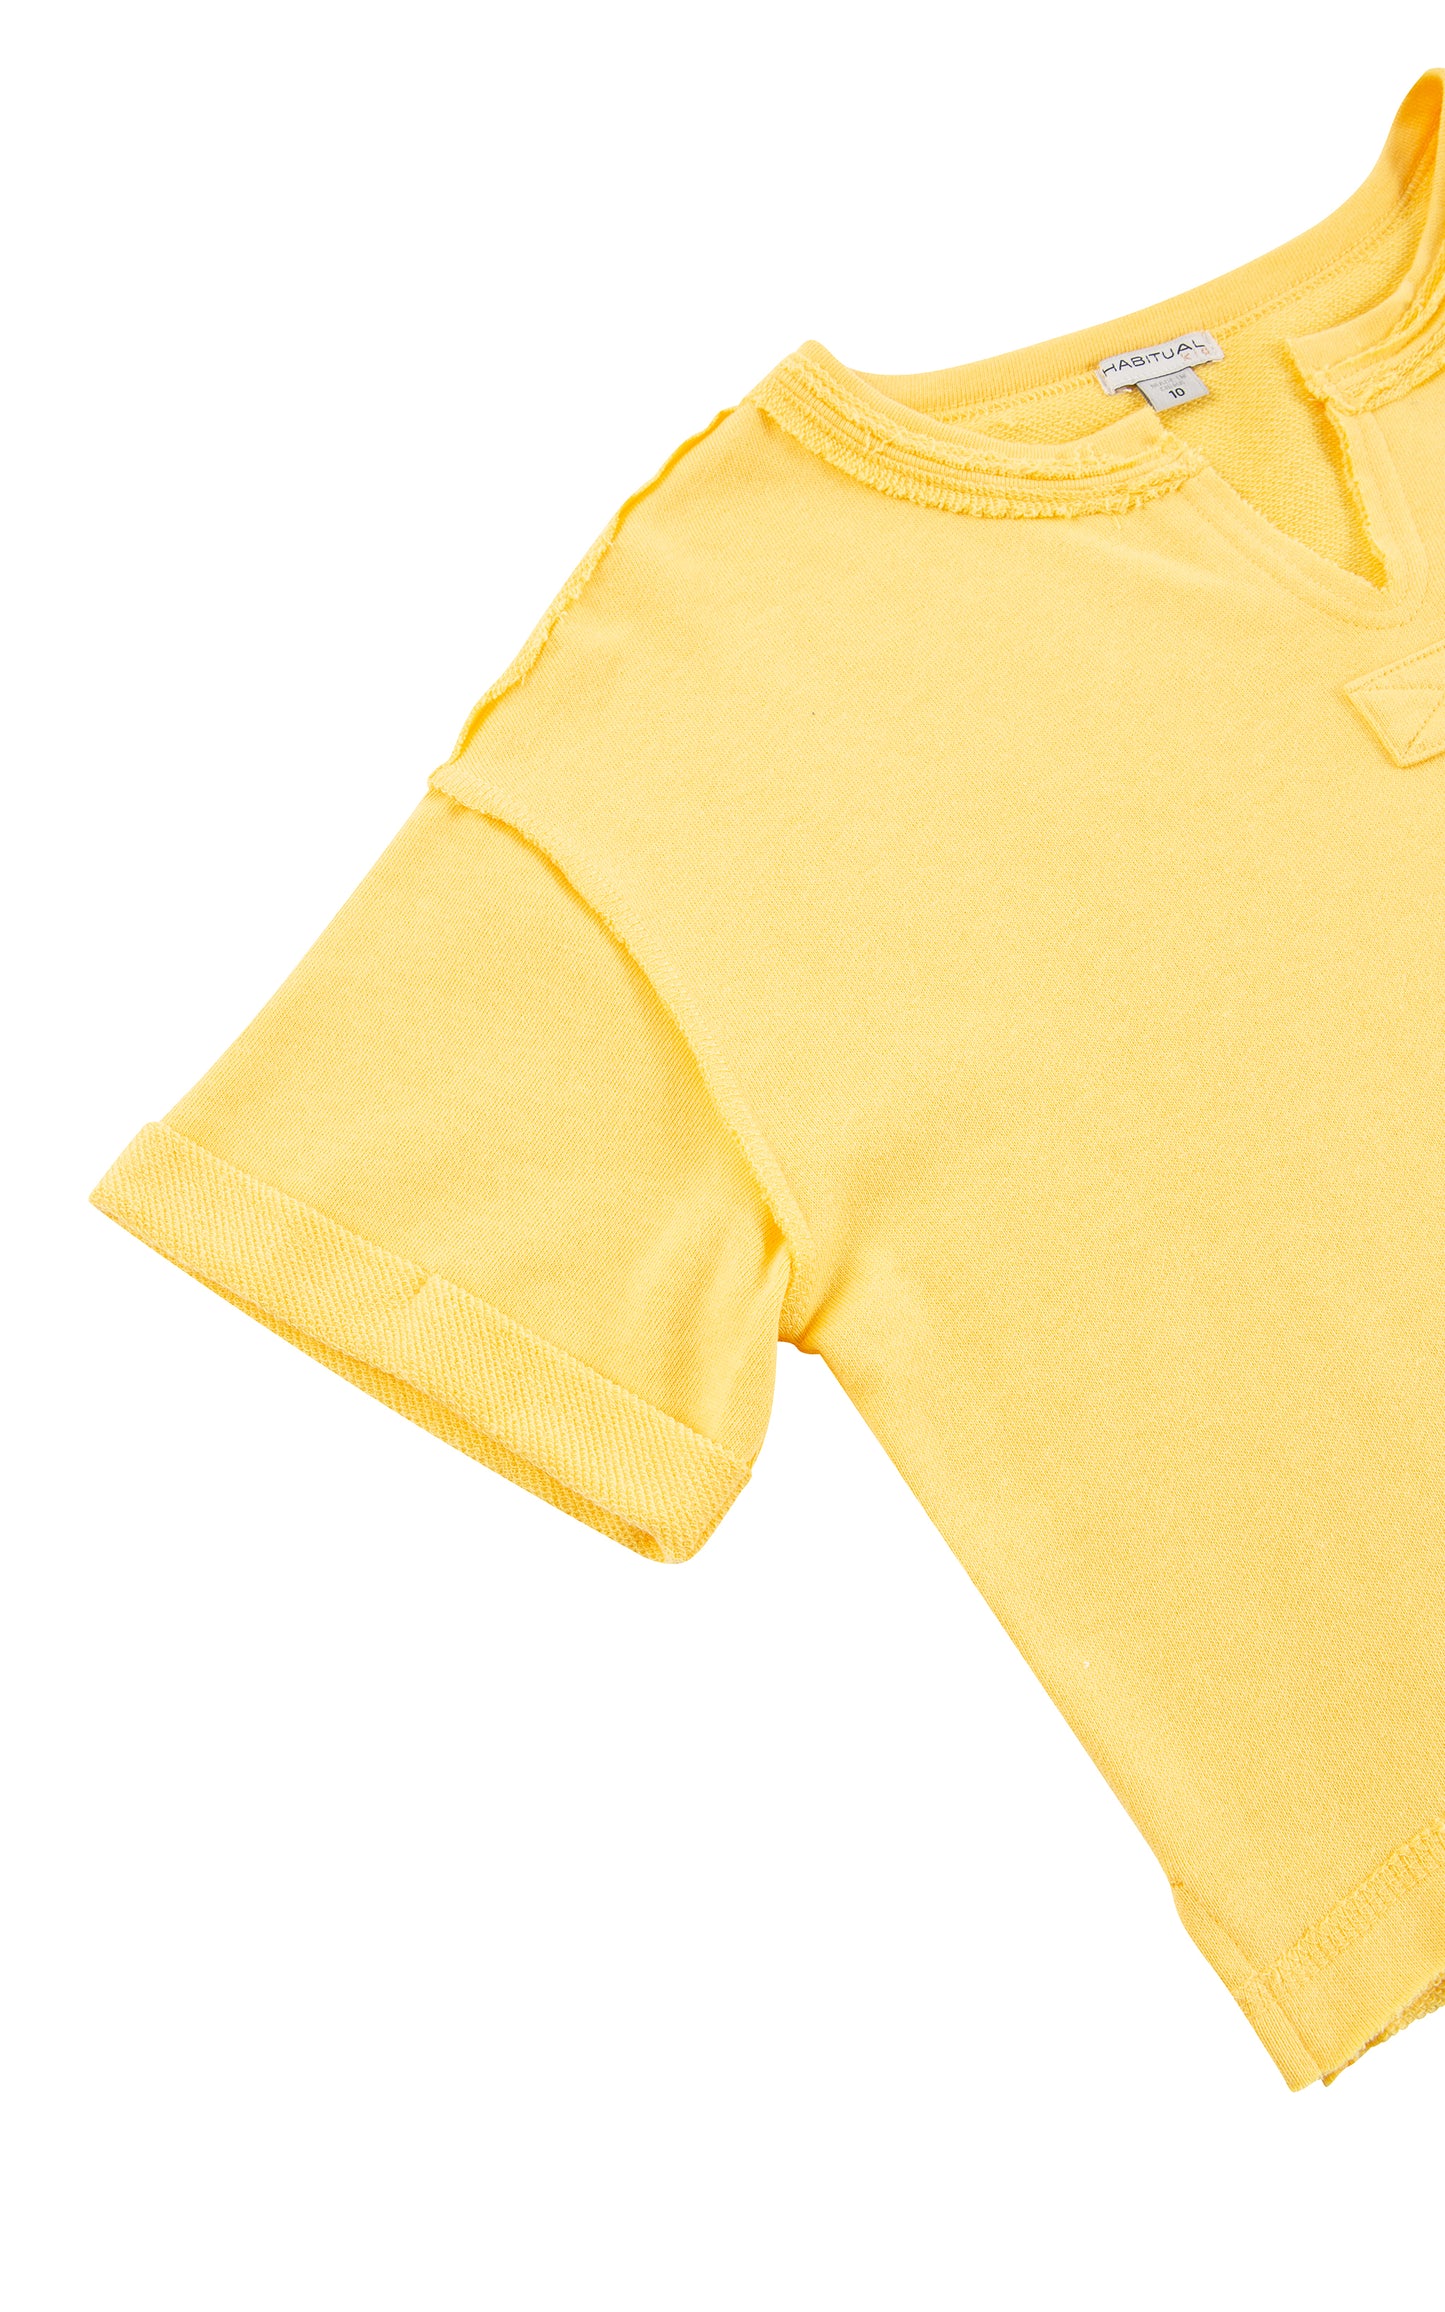 Close up of yellow French terry cloth shirt